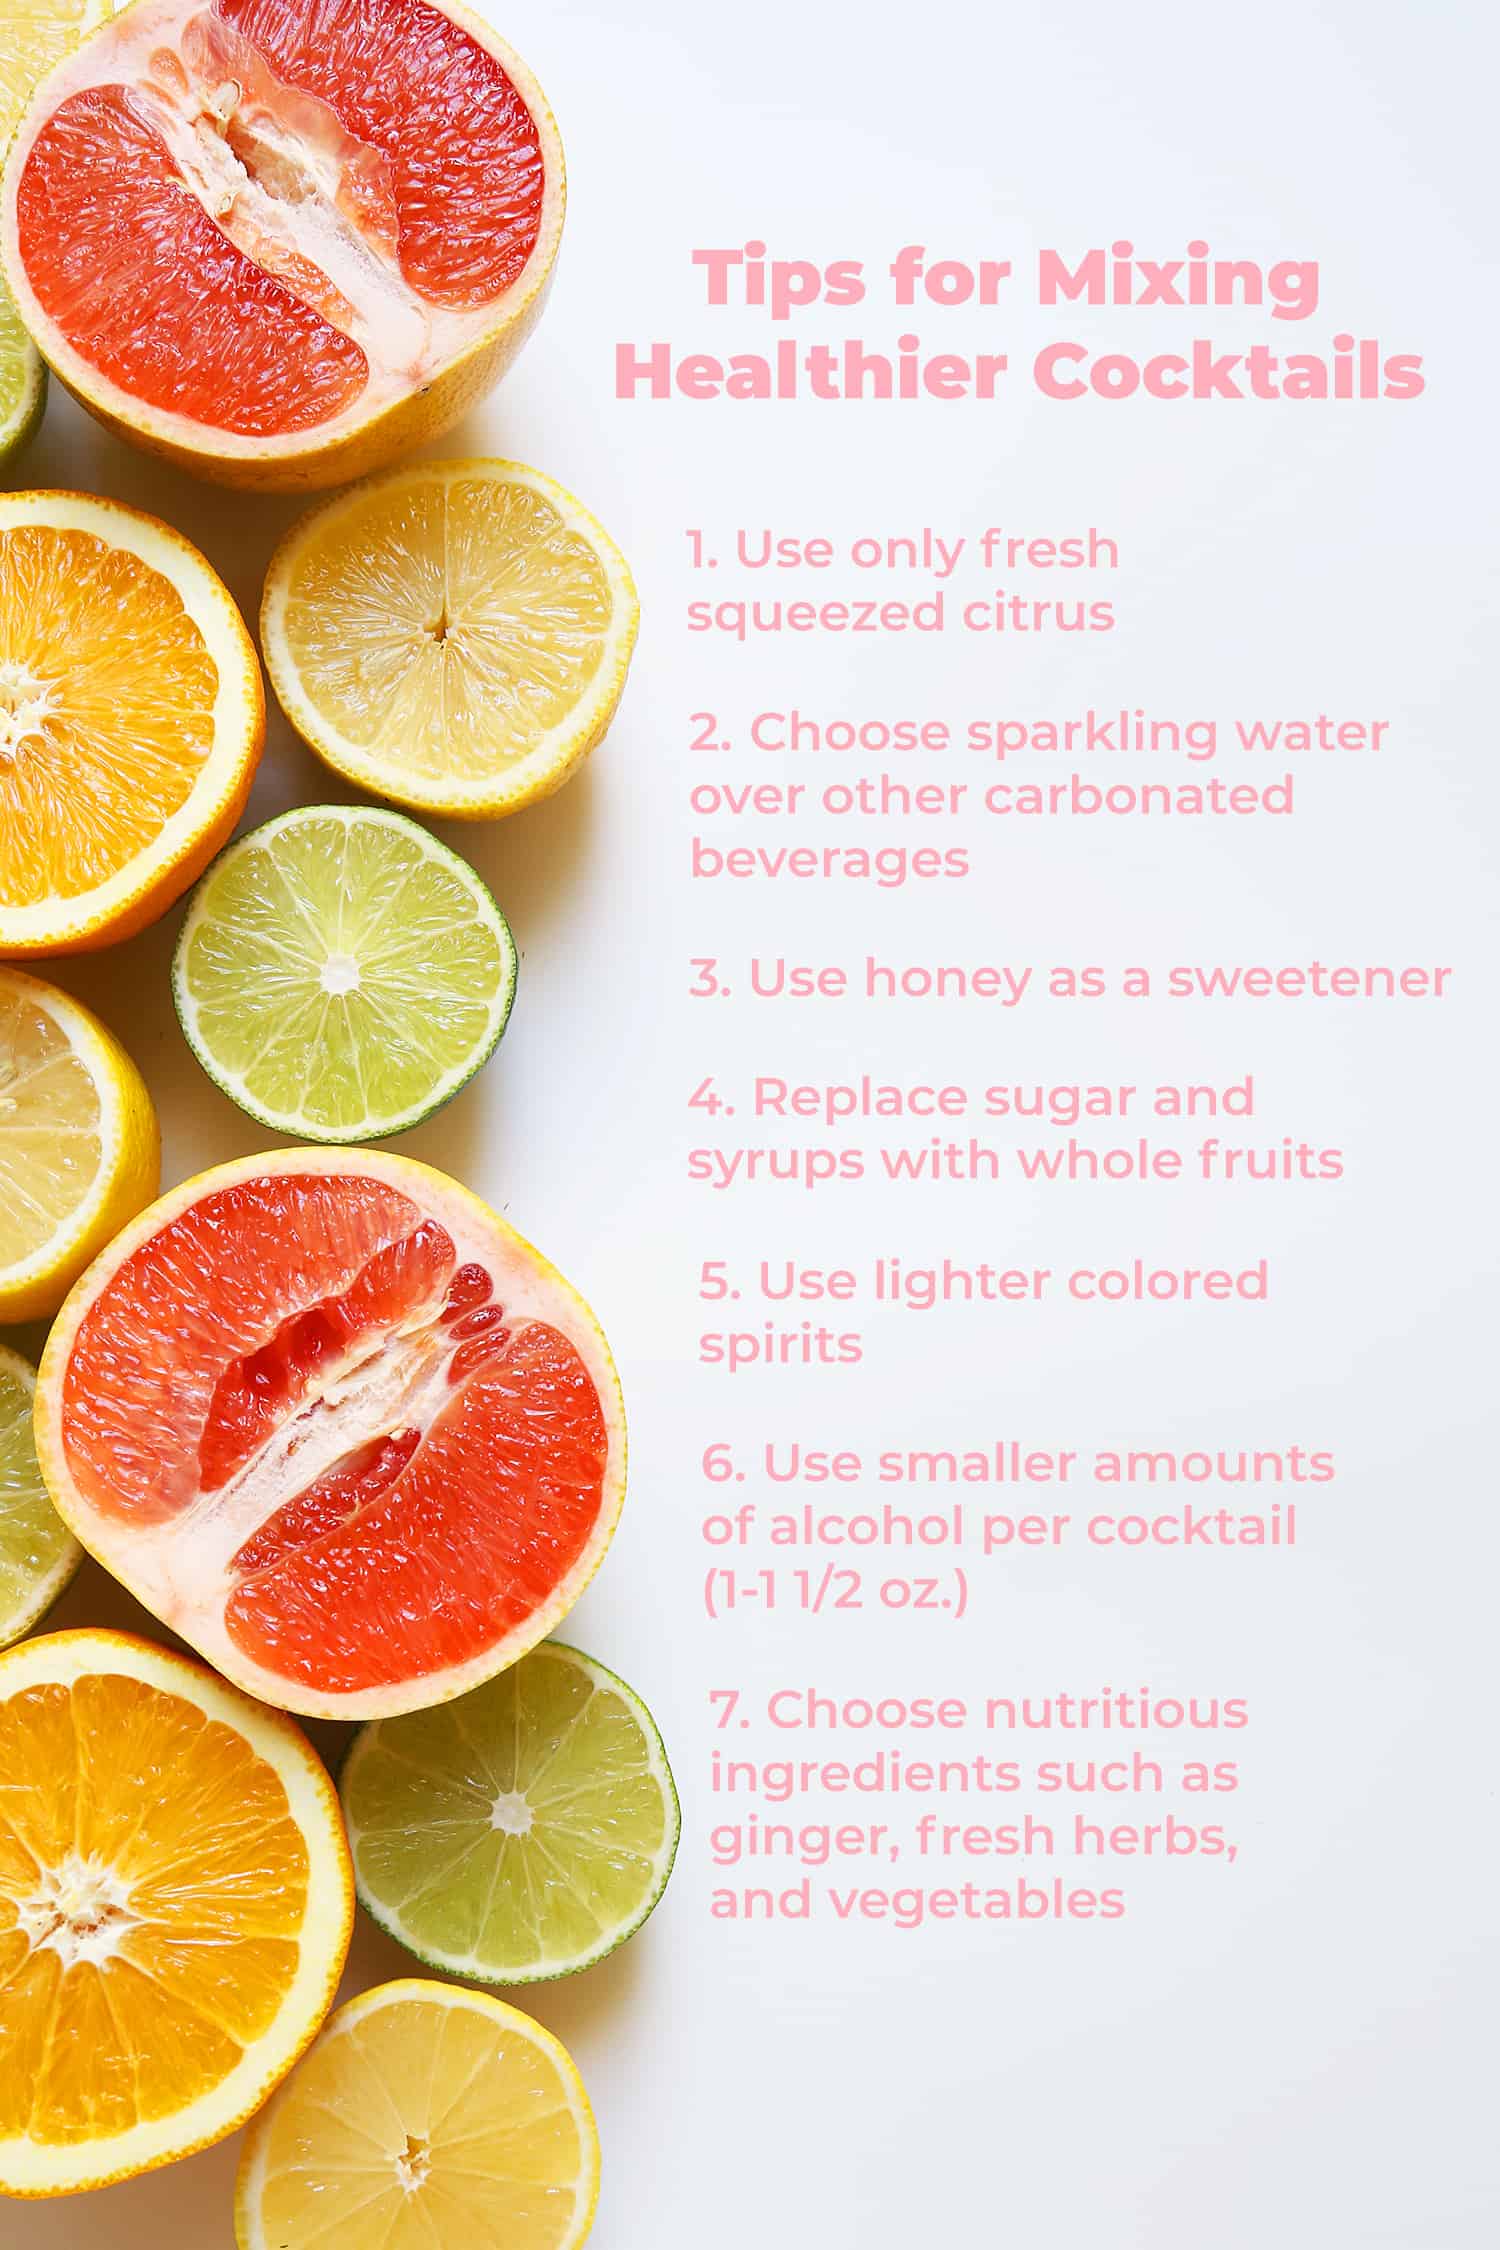 Tips for Mixing Healthier Cocktails + Recipes